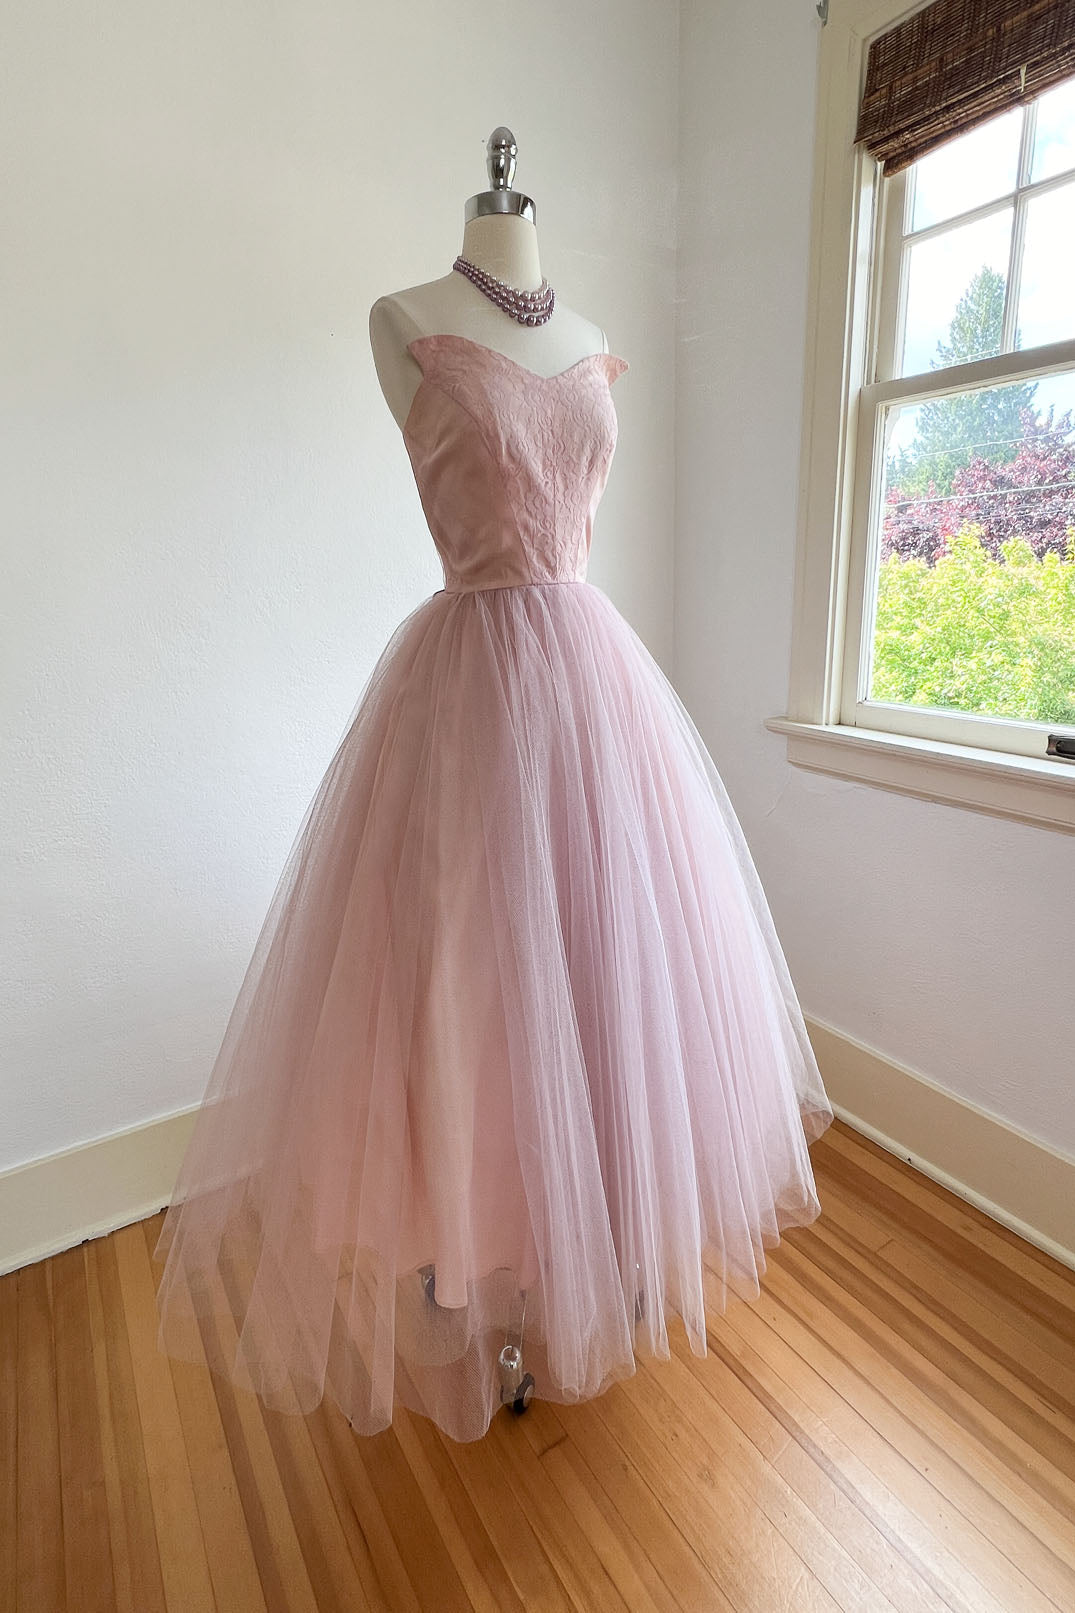 Vintage 1950s Dress - SWEET w an EDGE Pastel Pink Tulle Lace Strapless Gown w Fanged Bust Size S